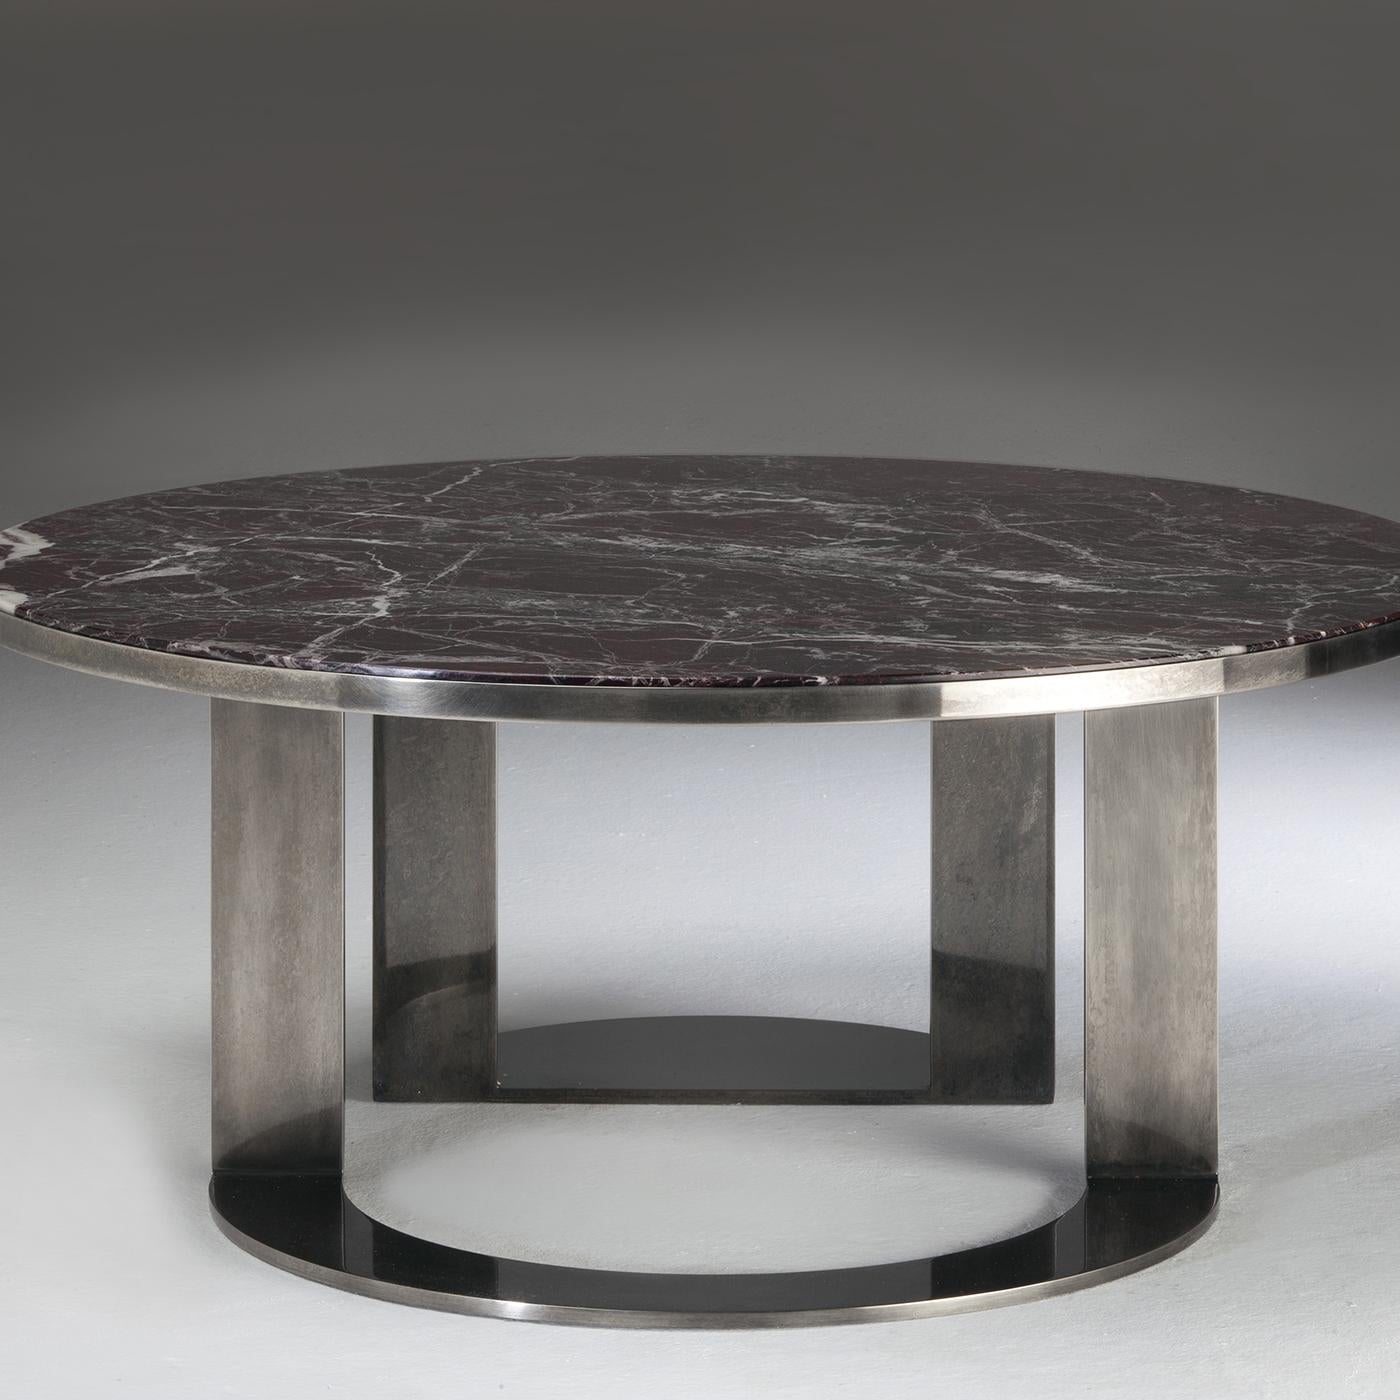 Designed by Luciano Pasut, this exquisite coffee table features an interplay of volumes and void created by the round top in Rosso Levanto marble mounted in a structure supported by asymmetrical cutout base in brushed and polished steel with a